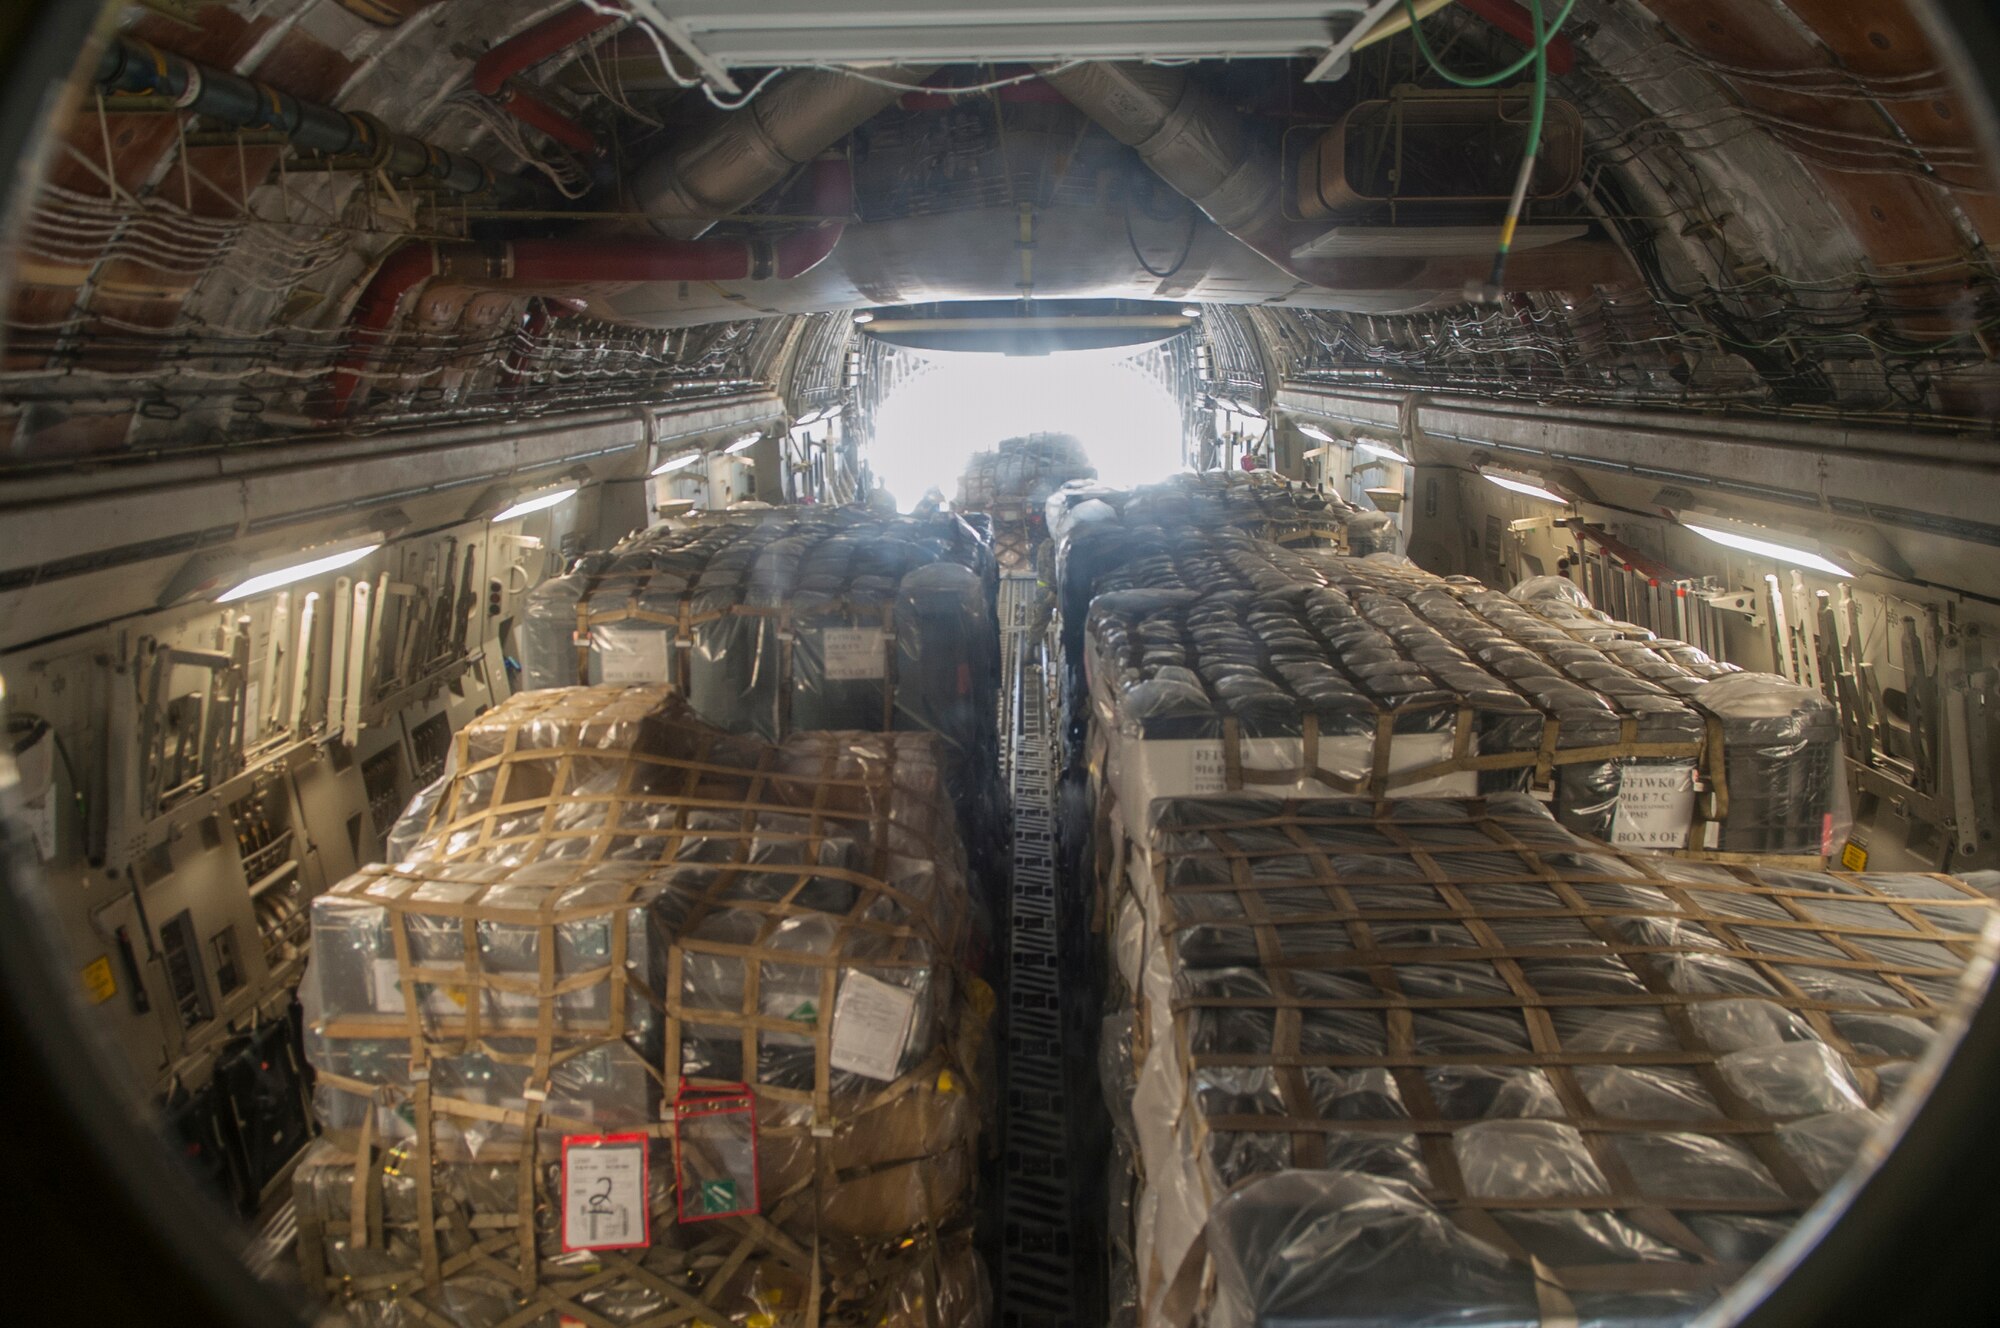 Medical supplies from the Air Force Medical Operations Agency are loaded onto a C-17 Globemaster III Sept. 26, 2014, at Joint Base San Antonio-Lackland, Texas. The supplies were being sent in support of Operation United Assistance to help treat patients and halt the spread of the Ebola virus. The supplies will support field hospitals and aid workers battling the virus in Monrovia, Liberia. The C-17 is assigned to the 97th Air Mobility Wing. (U.S. Air Force photo/Airman Justine K. Rho